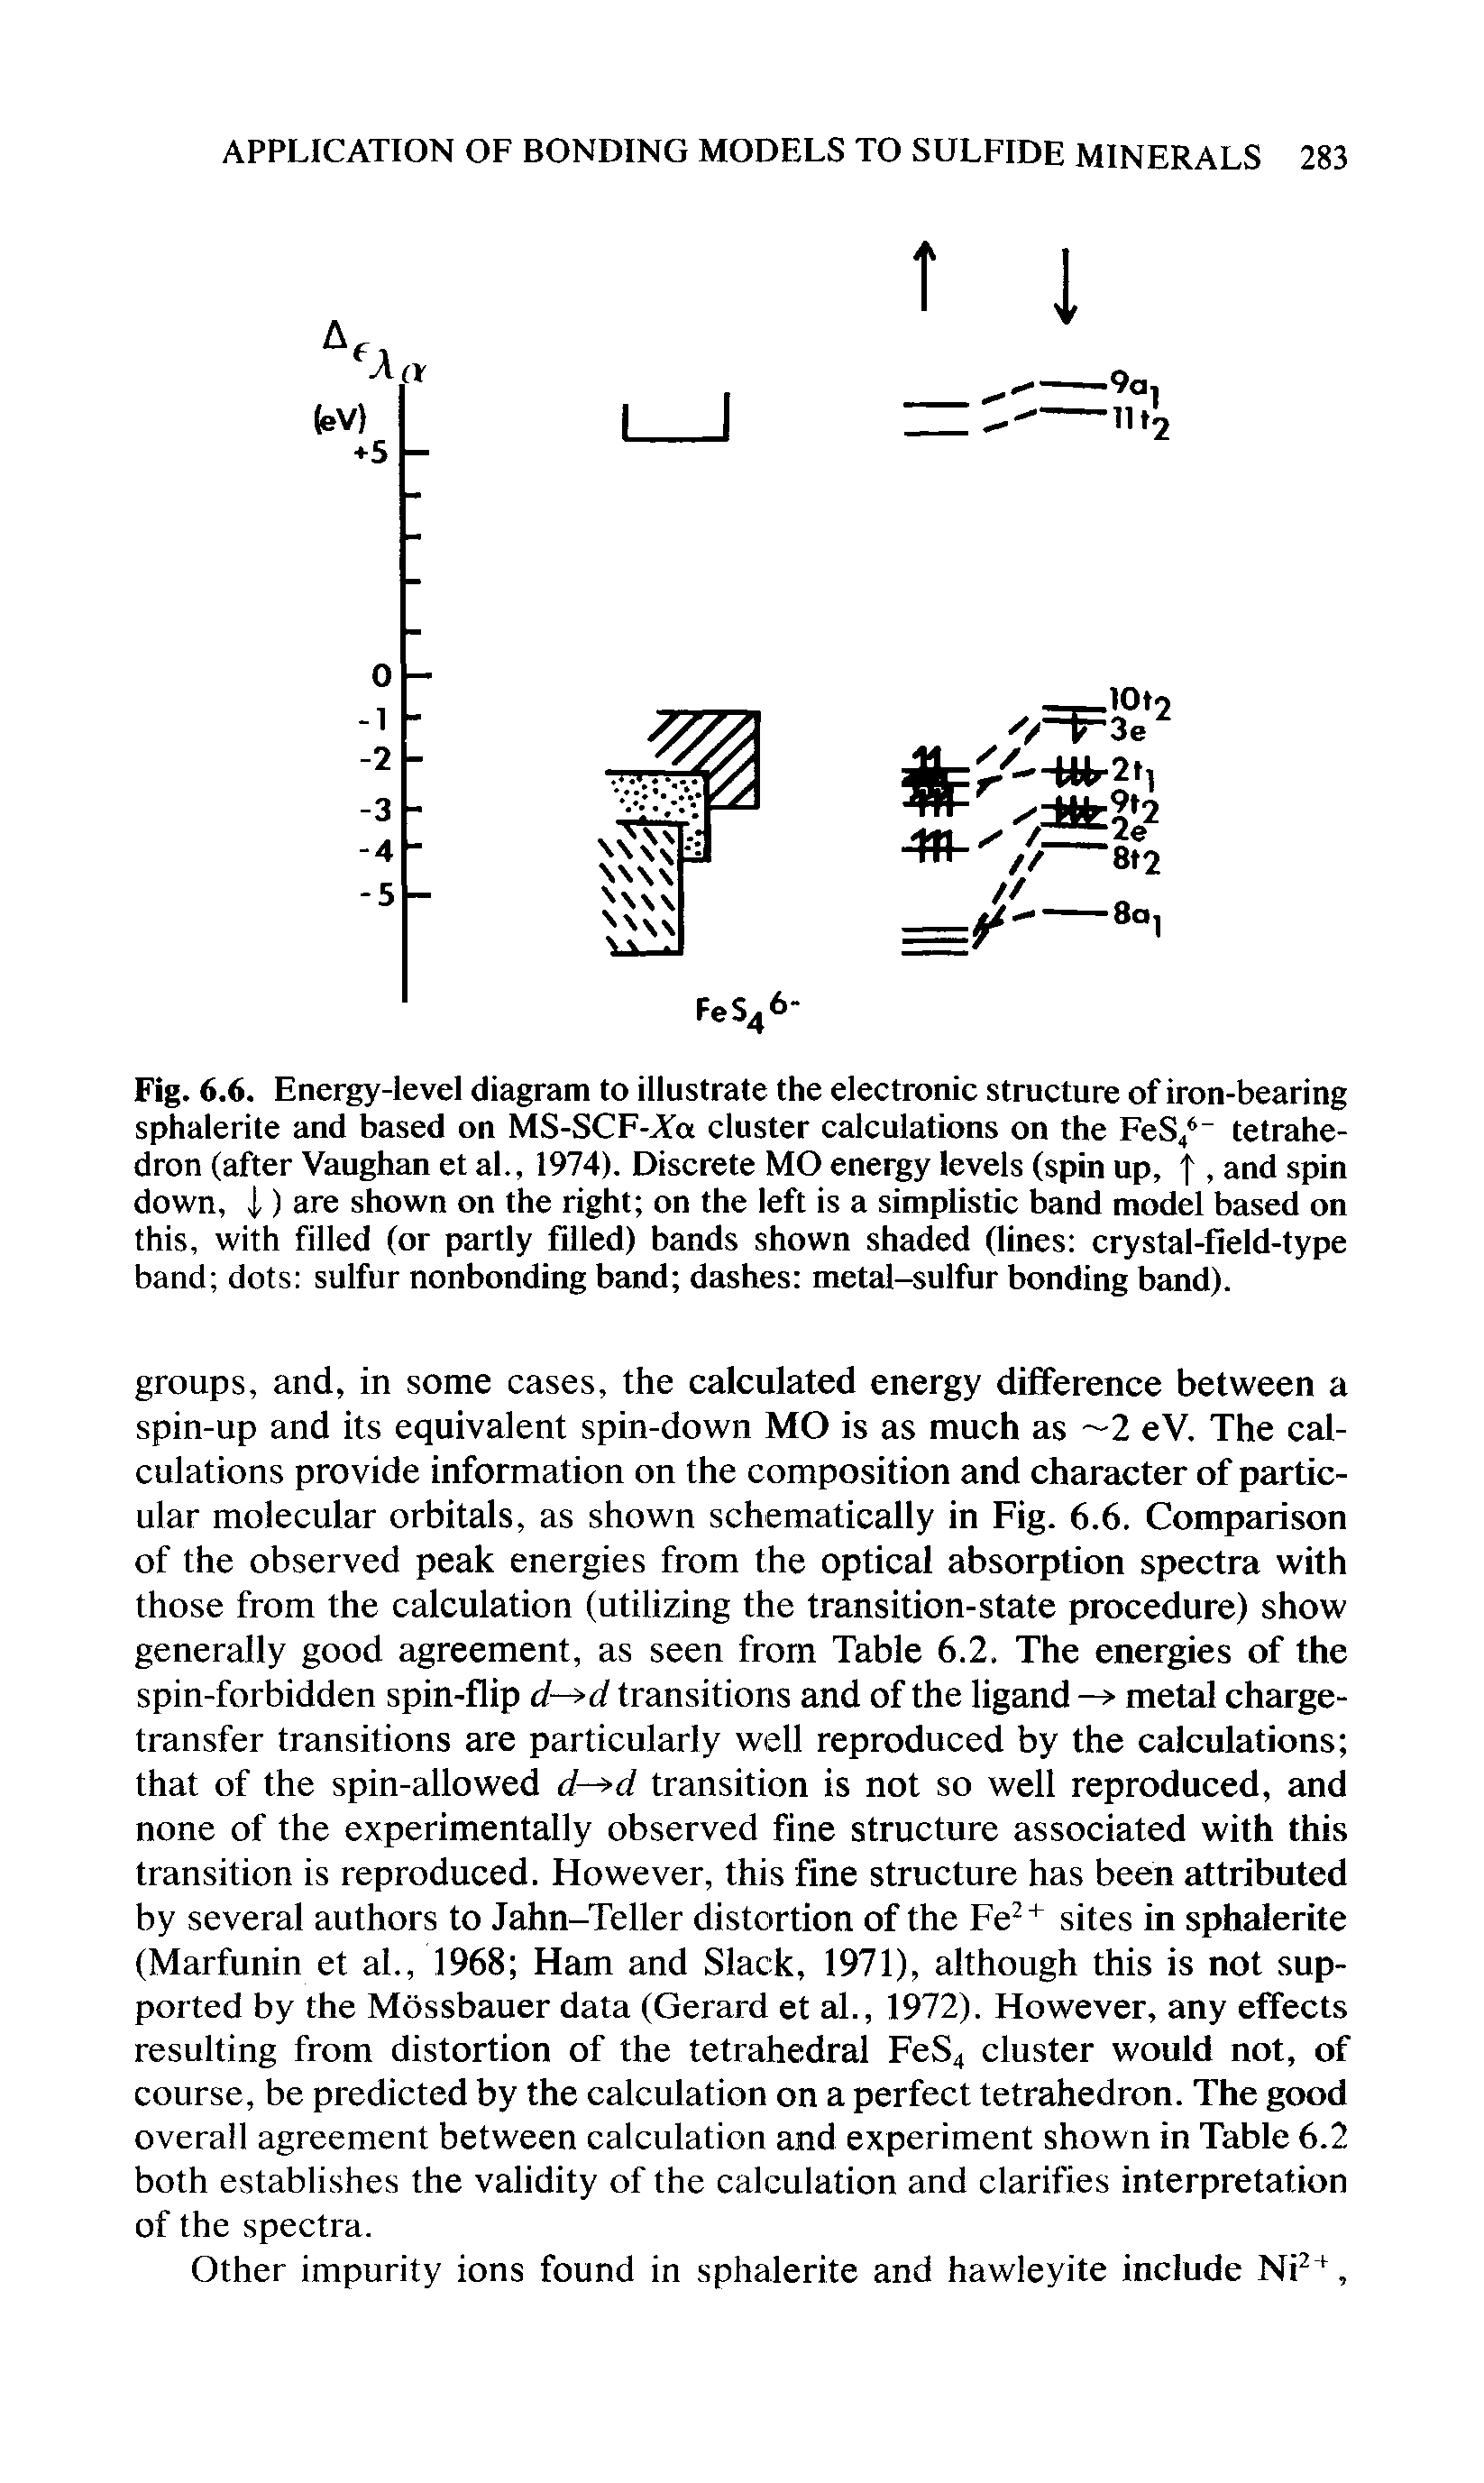 Fig. 6.6. Energy-level diagram to illustrate the electronic structure of iron-bearing sphalerite and based on MS-SCF-A a cluster calculations on the FeS/ tetrahedron (after Vaughan et al., 1974). Discrete MO energy levels (spin up,, and spin down, i ) are shown on the right on the left is a simplistic band model based on this, with filled (or partly filled) bands shown shaded (lines crystal-field-type band dots sulfur nonbonding band dashes metal-sulfur bonding band).